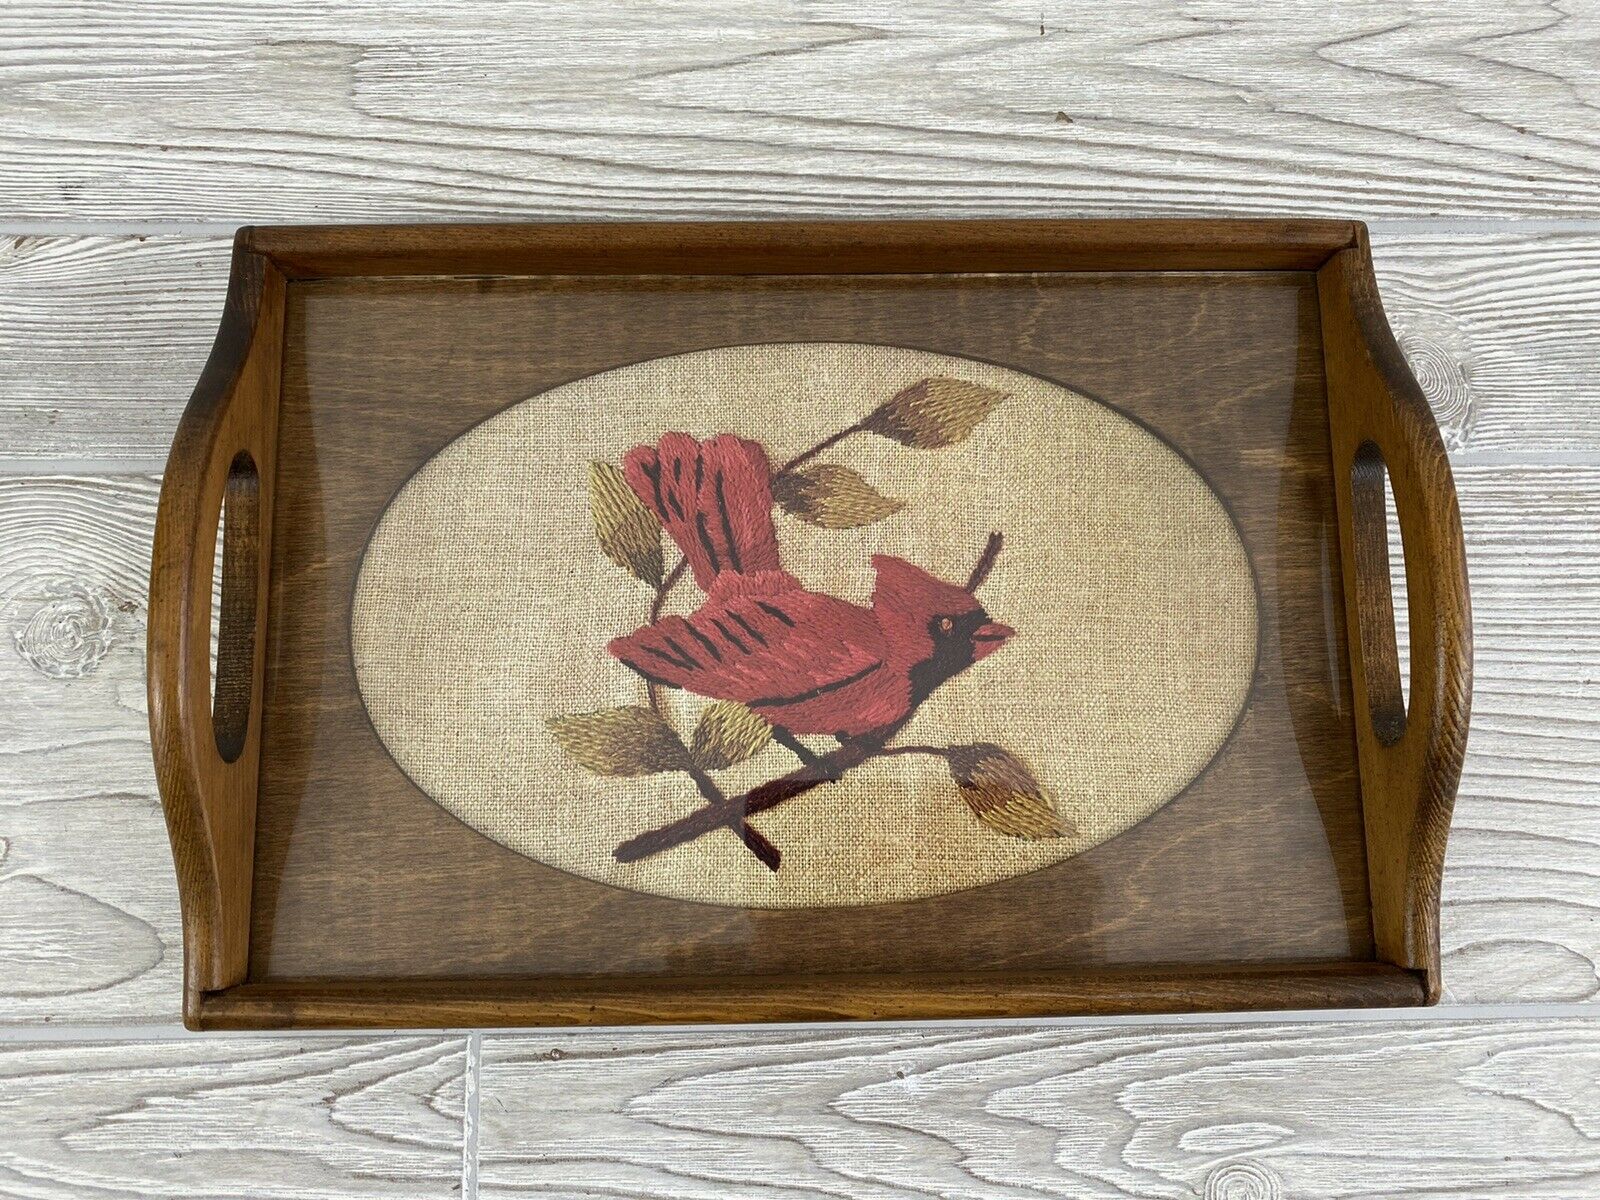 Vintage Wood Needlepoint Tray By Three Mountaineers Cardinal Display Image /r